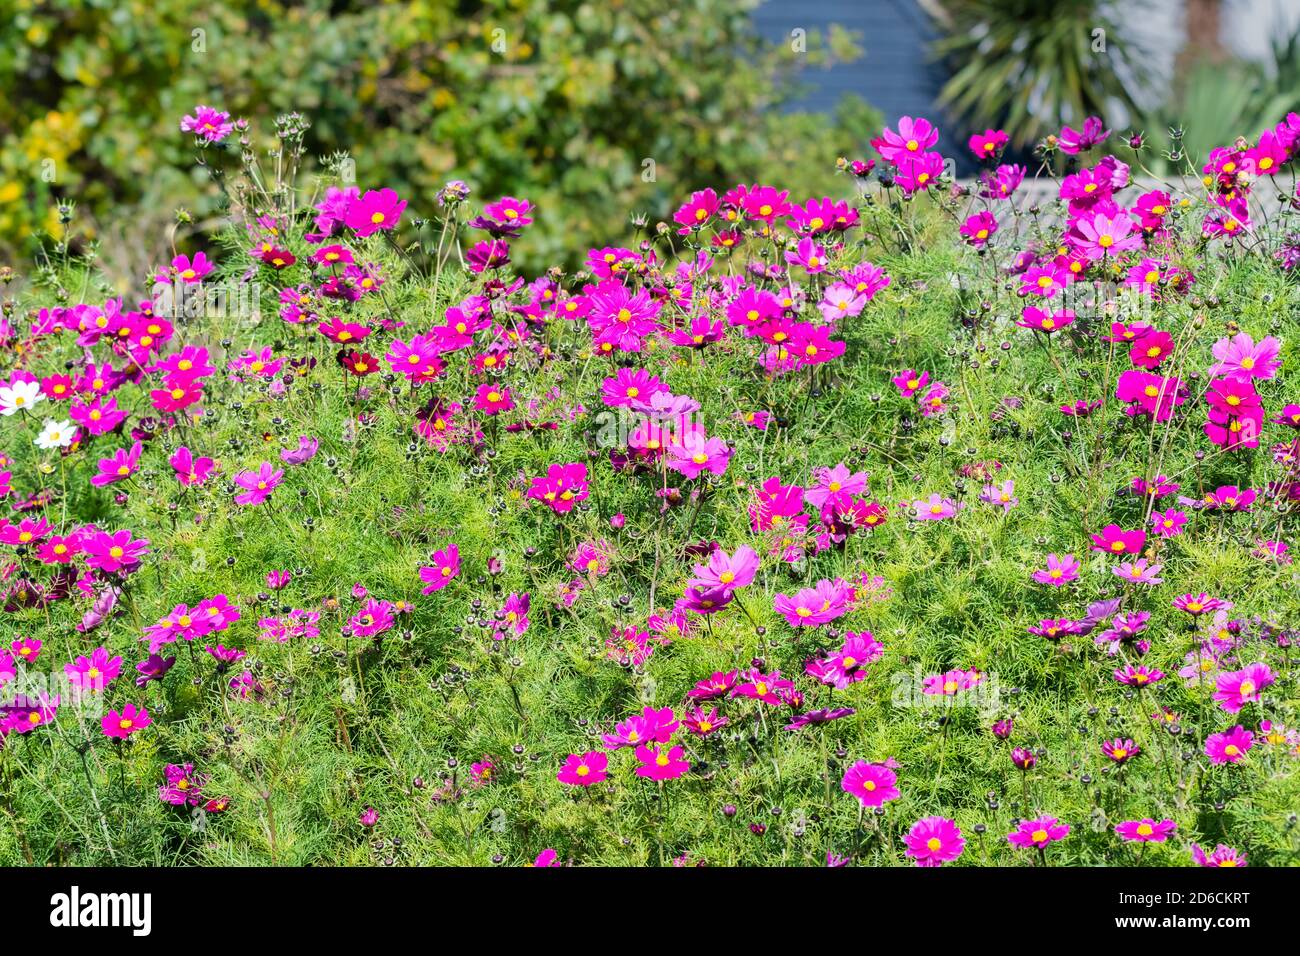 Garden Cosmos (Cosmos bipinnatus, Mexican aster), a flowering herbaceous plant with mauve / pink flowers in Autumn in West Sussex, England, UK. Stock Photo